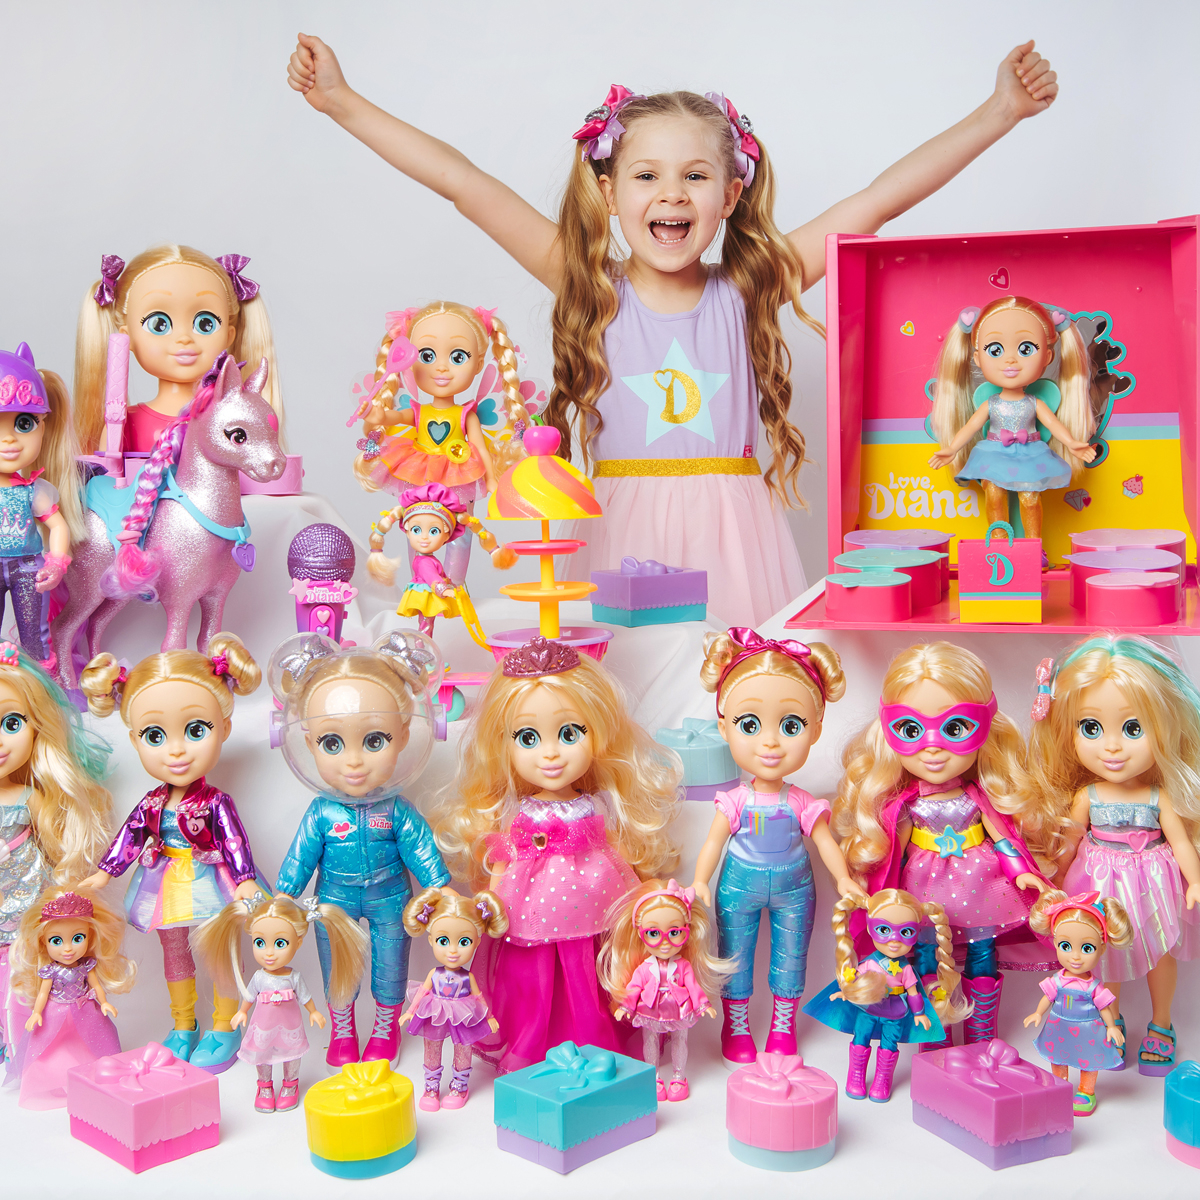 The Love, Diana Toy Line at Walmart Is Selling Out in a Snap!